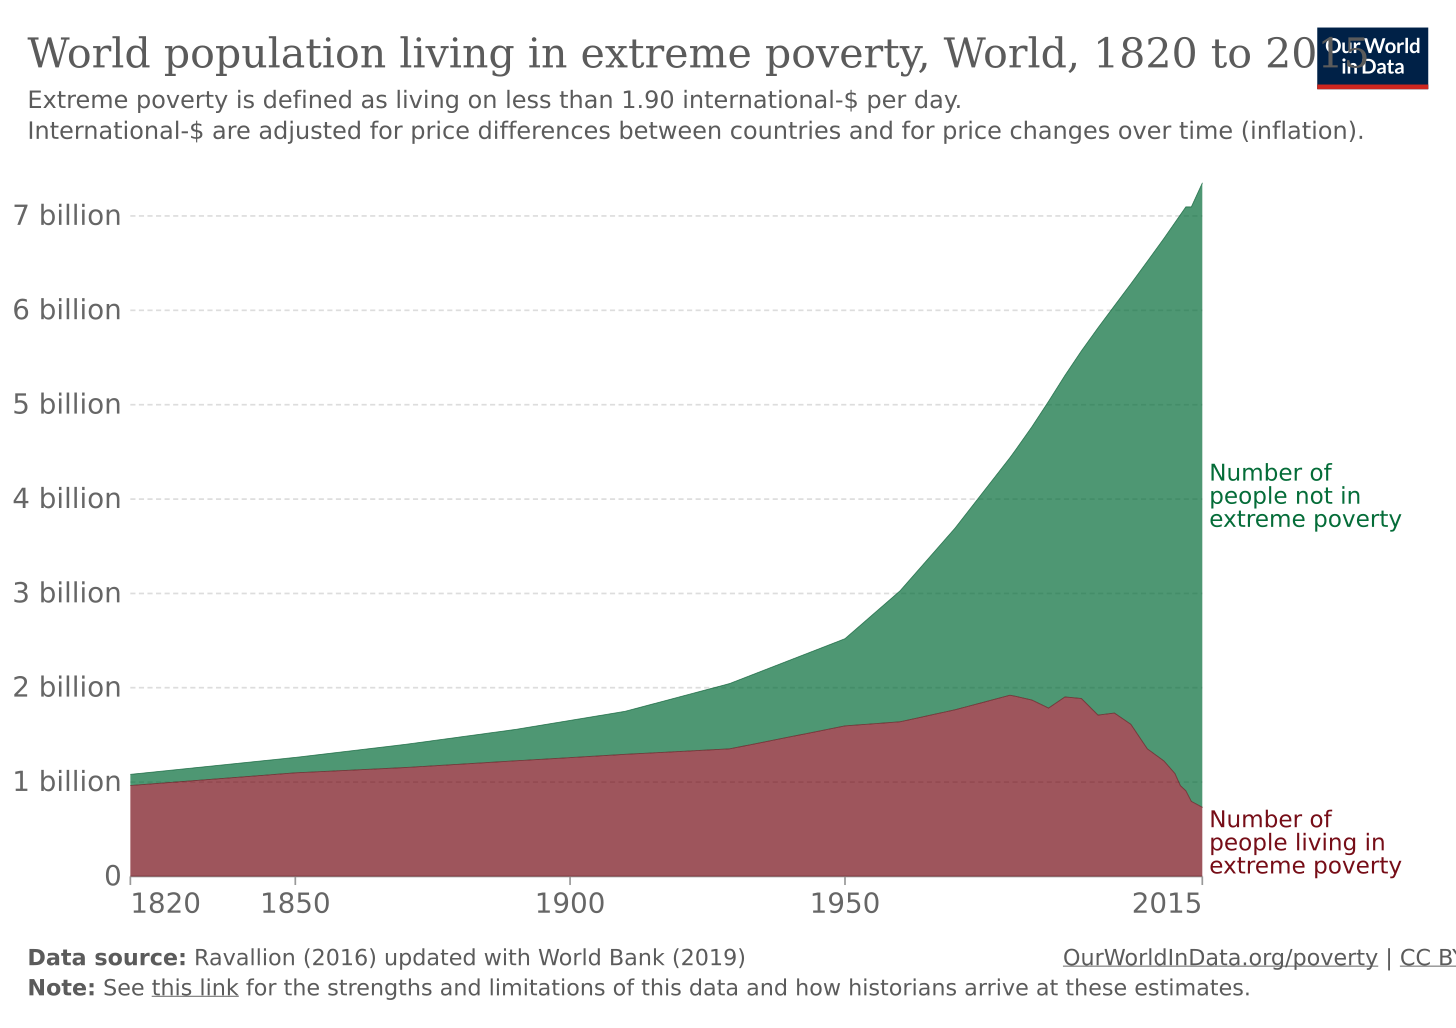 World population living in extreme poverty, World, 1820 to 2015